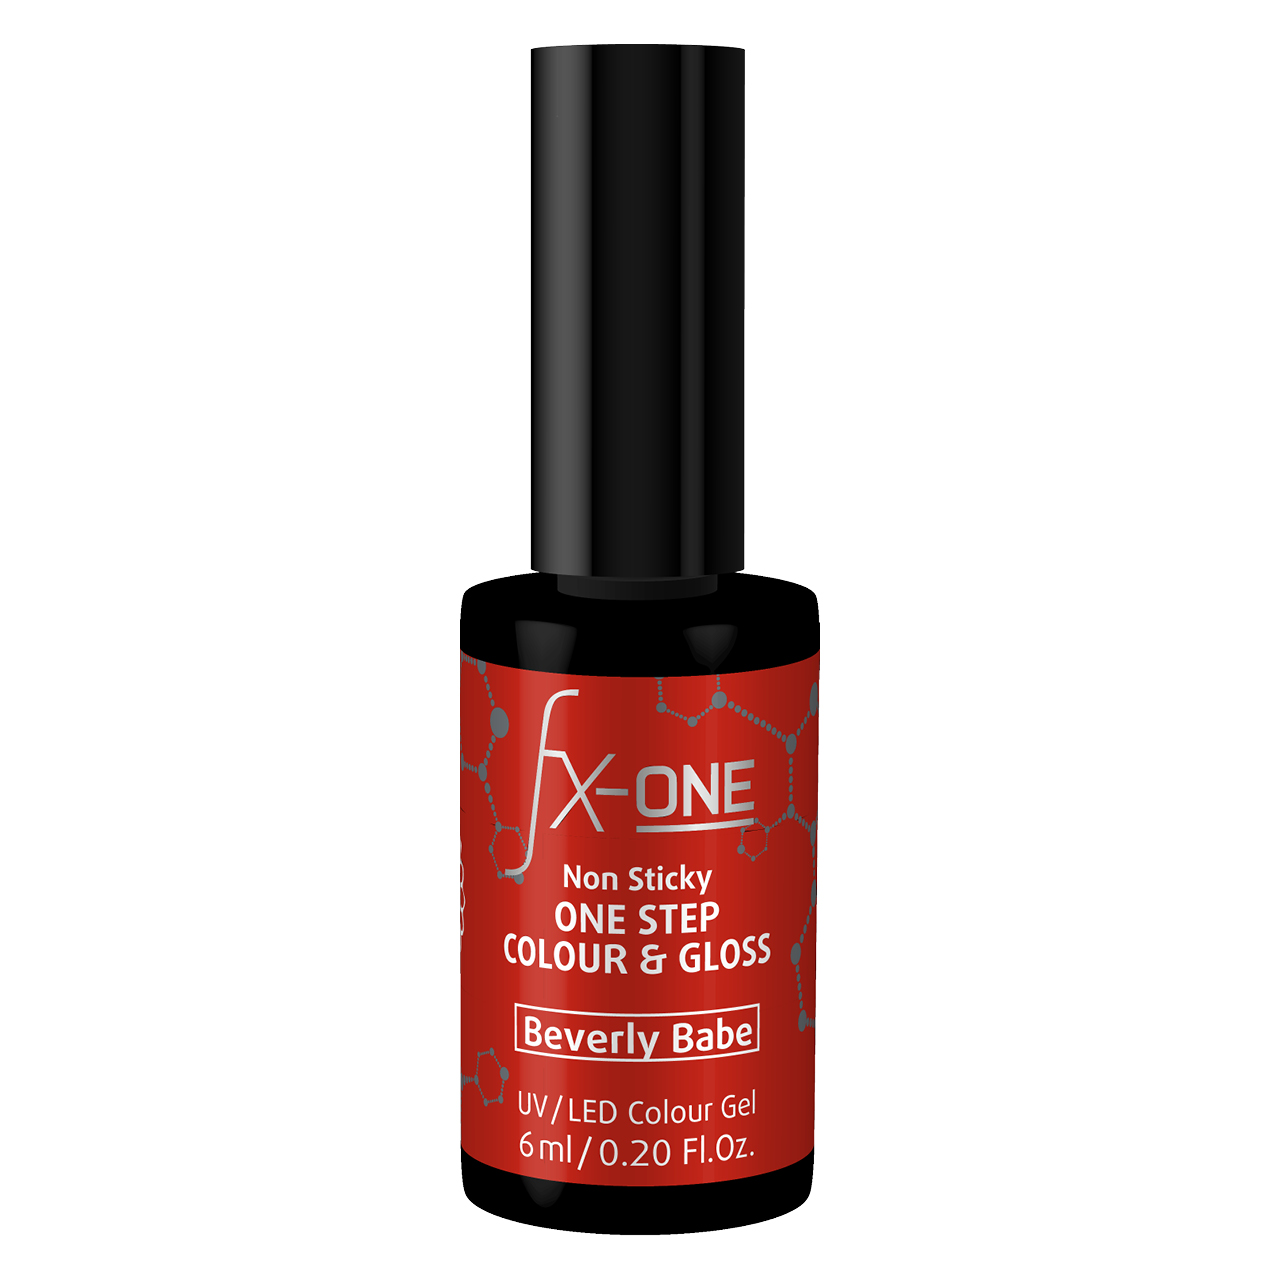 Fx-one Colour & Gloss Beverly Babe 6 Ml